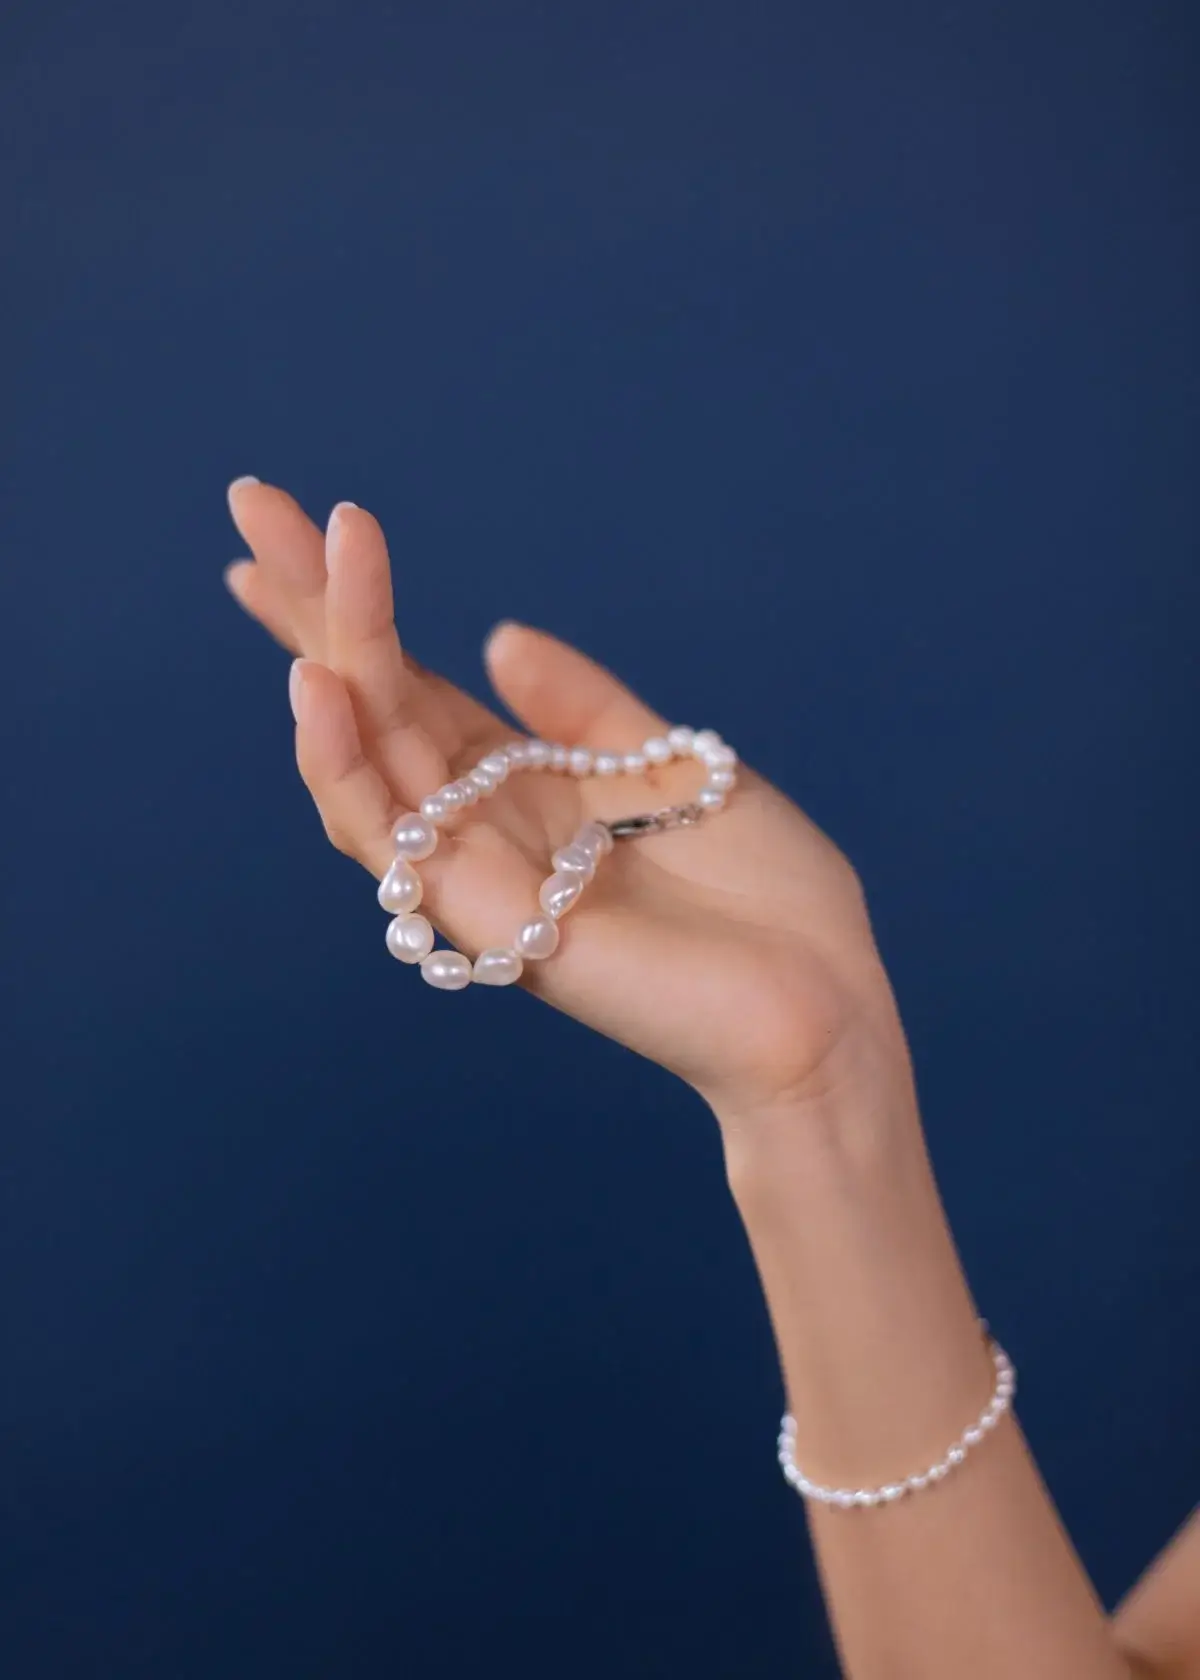 How do I know if My Selenite Bracelet is Authentic?